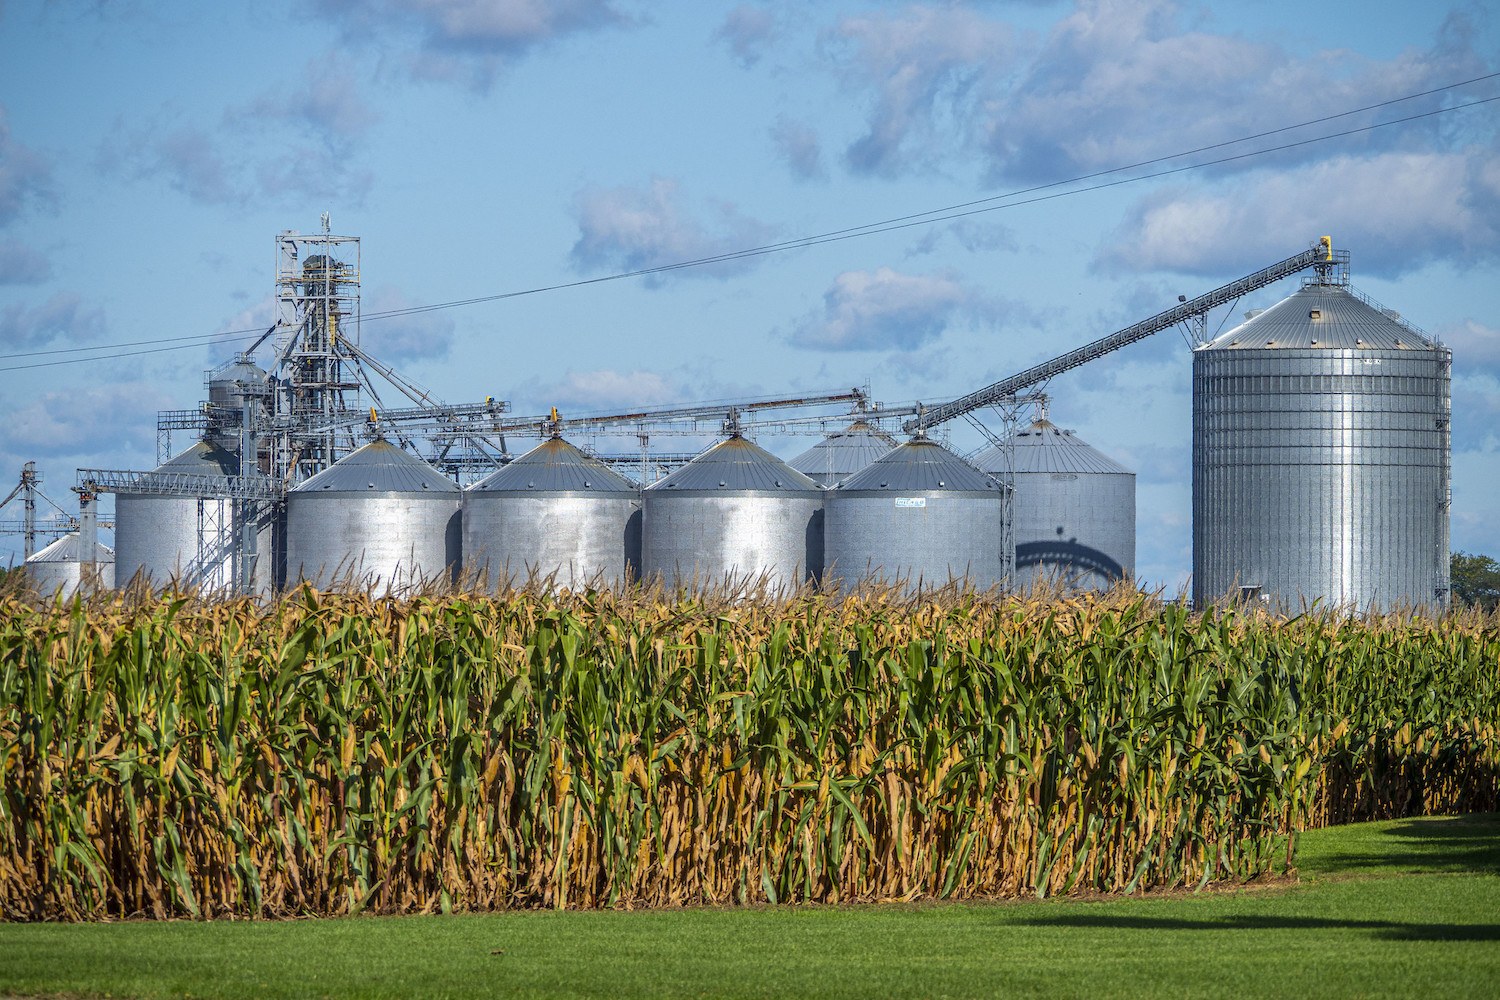 Row of silver silos and rows of corn with blue cloudy skies. June 2021